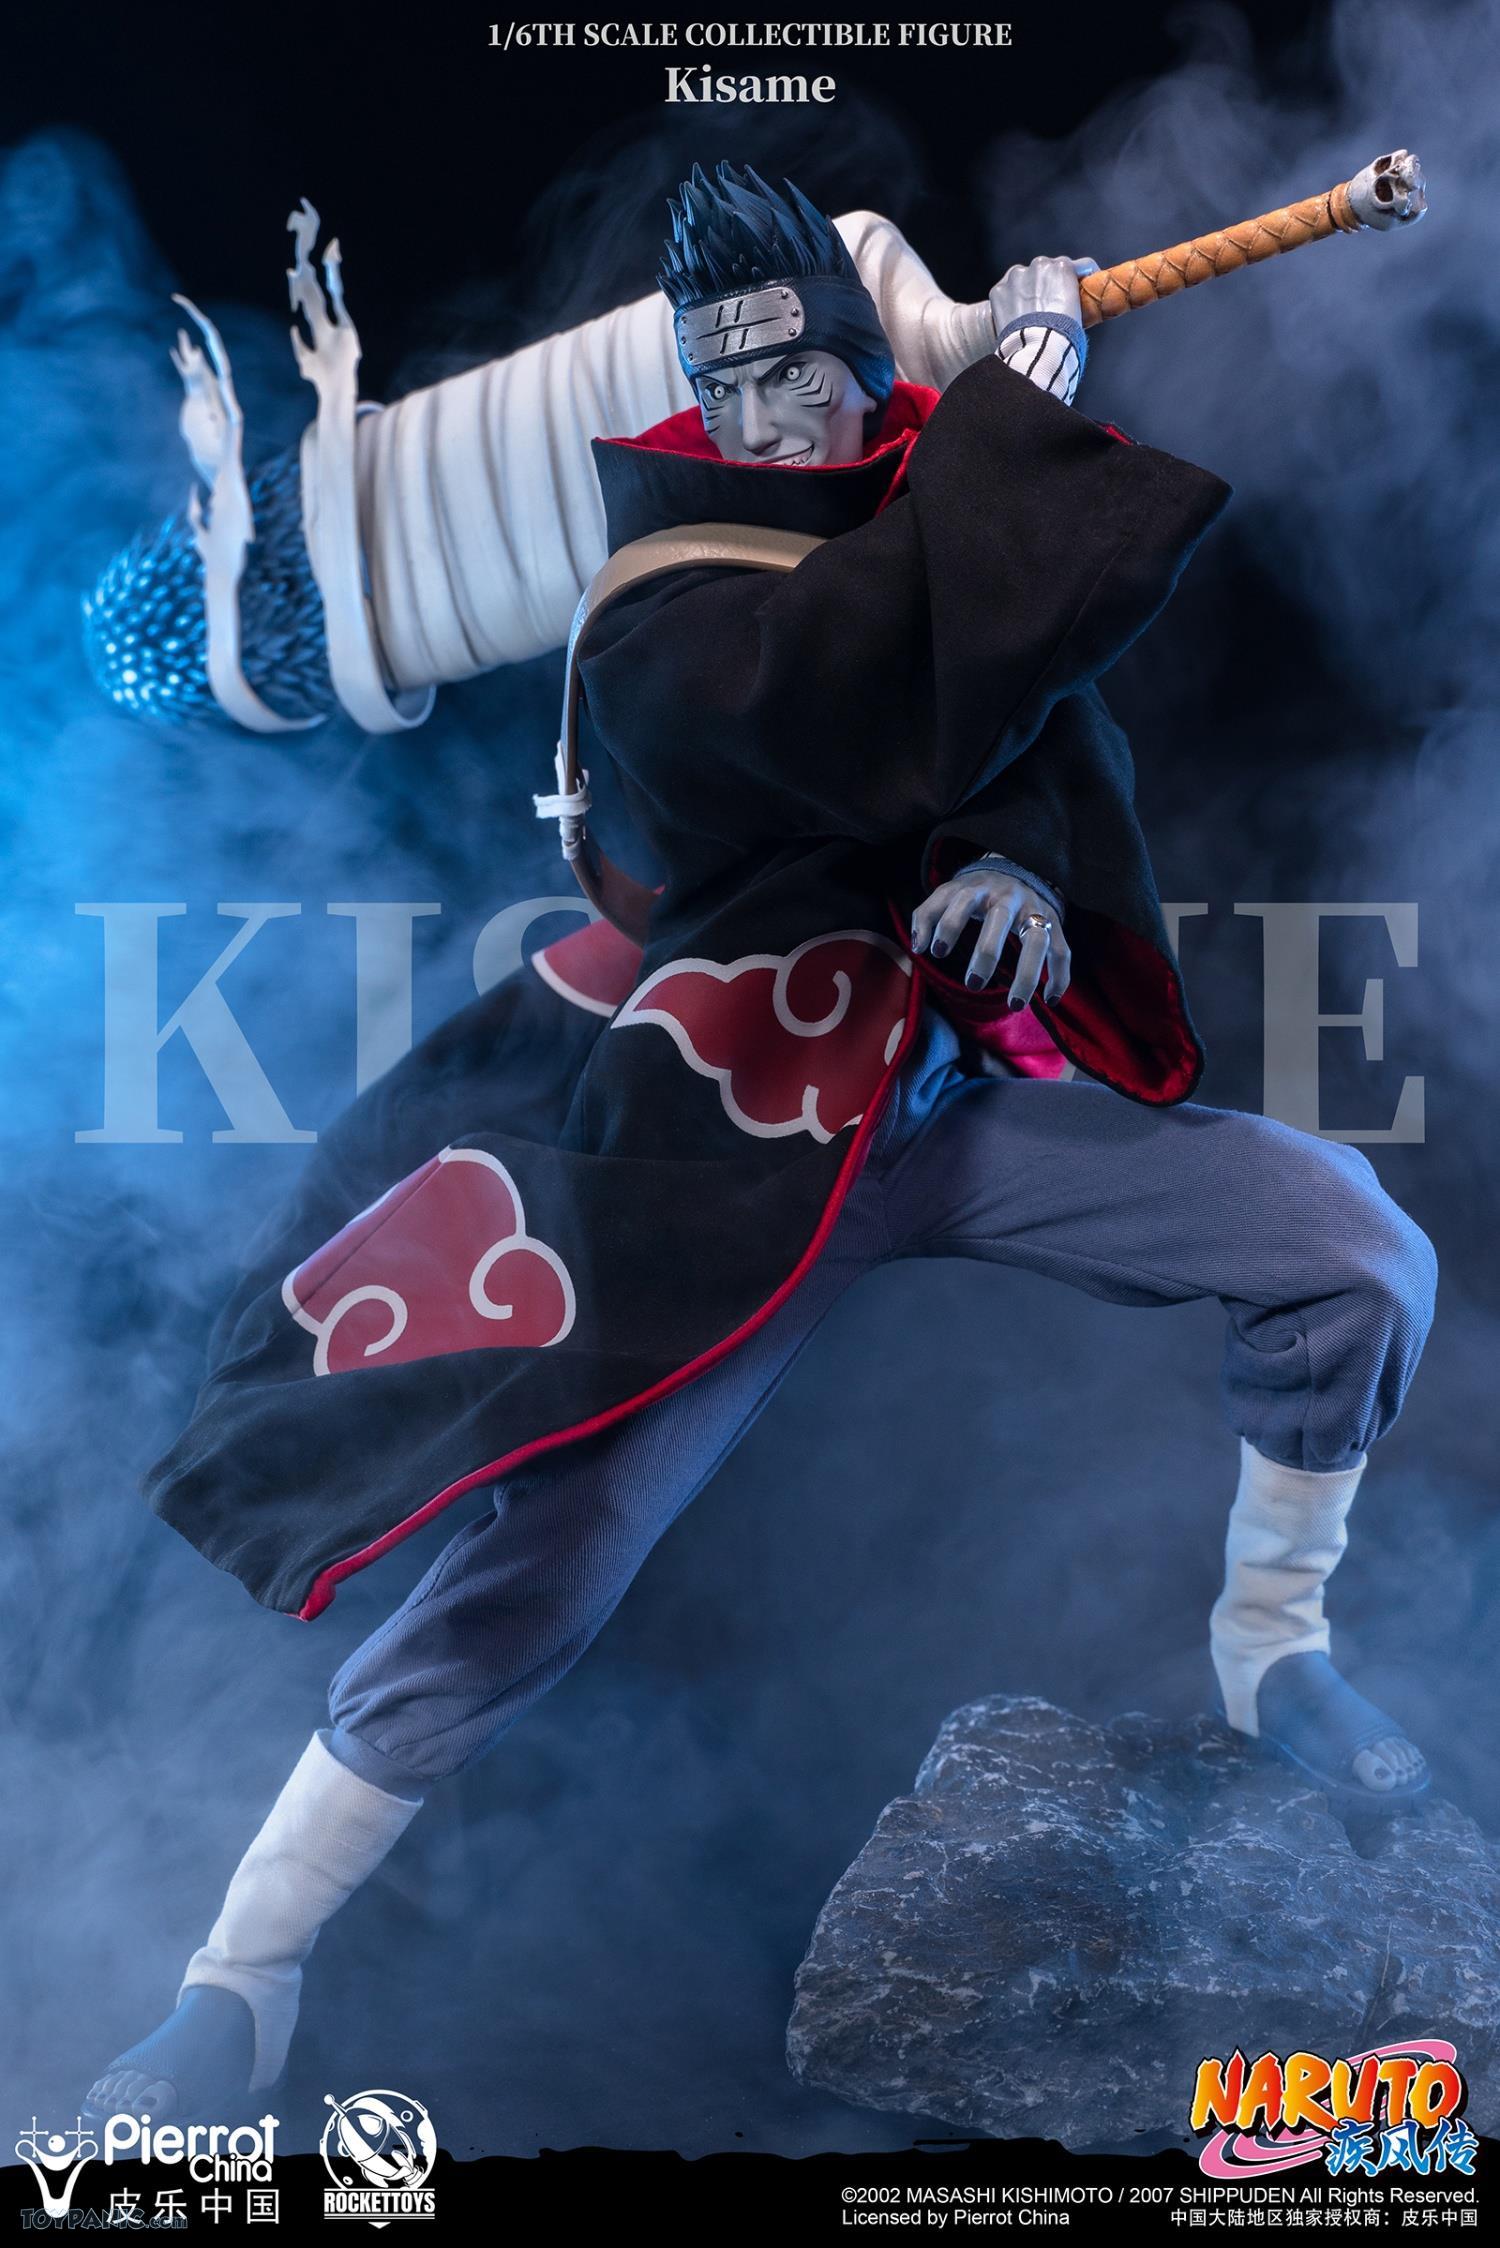 NEW PRODUCT: Rocket Toys ROC-007 1/6 Scale Kisame 221202460435PM_6417009